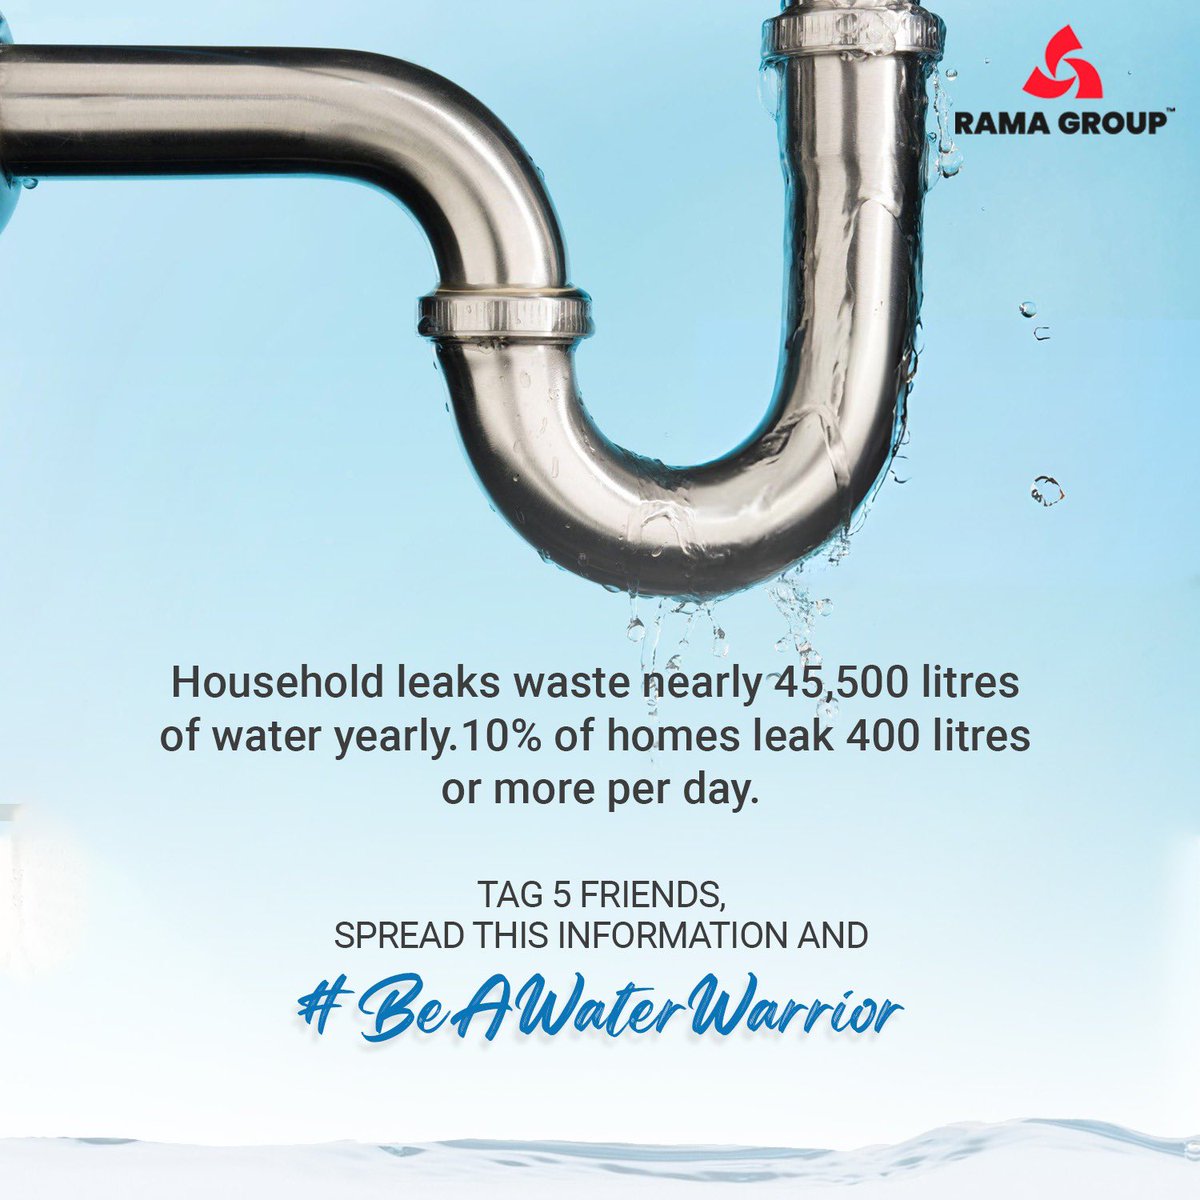 #BeAWaterWarrior Check for and repair leaky faucets, pipes, and toilets from time to time to prevent significant water waste. This is important information and we want you to spread this amongst as many people as possible. Tag 5 friends, spread this information and win.